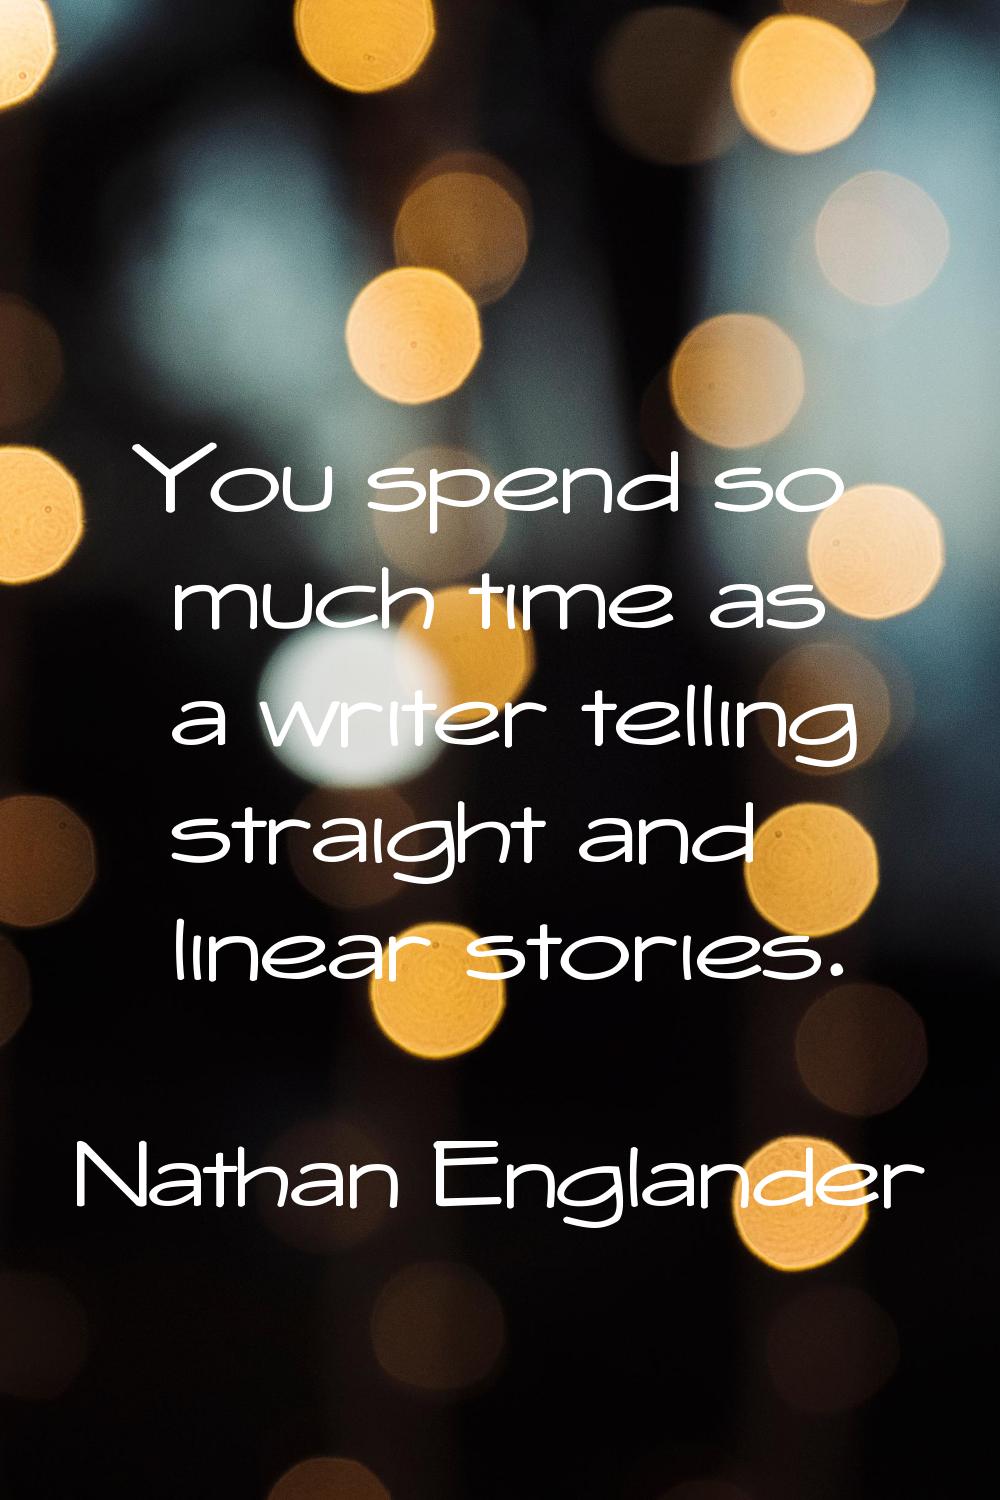 You spend so much time as a writer telling straight and linear stories.